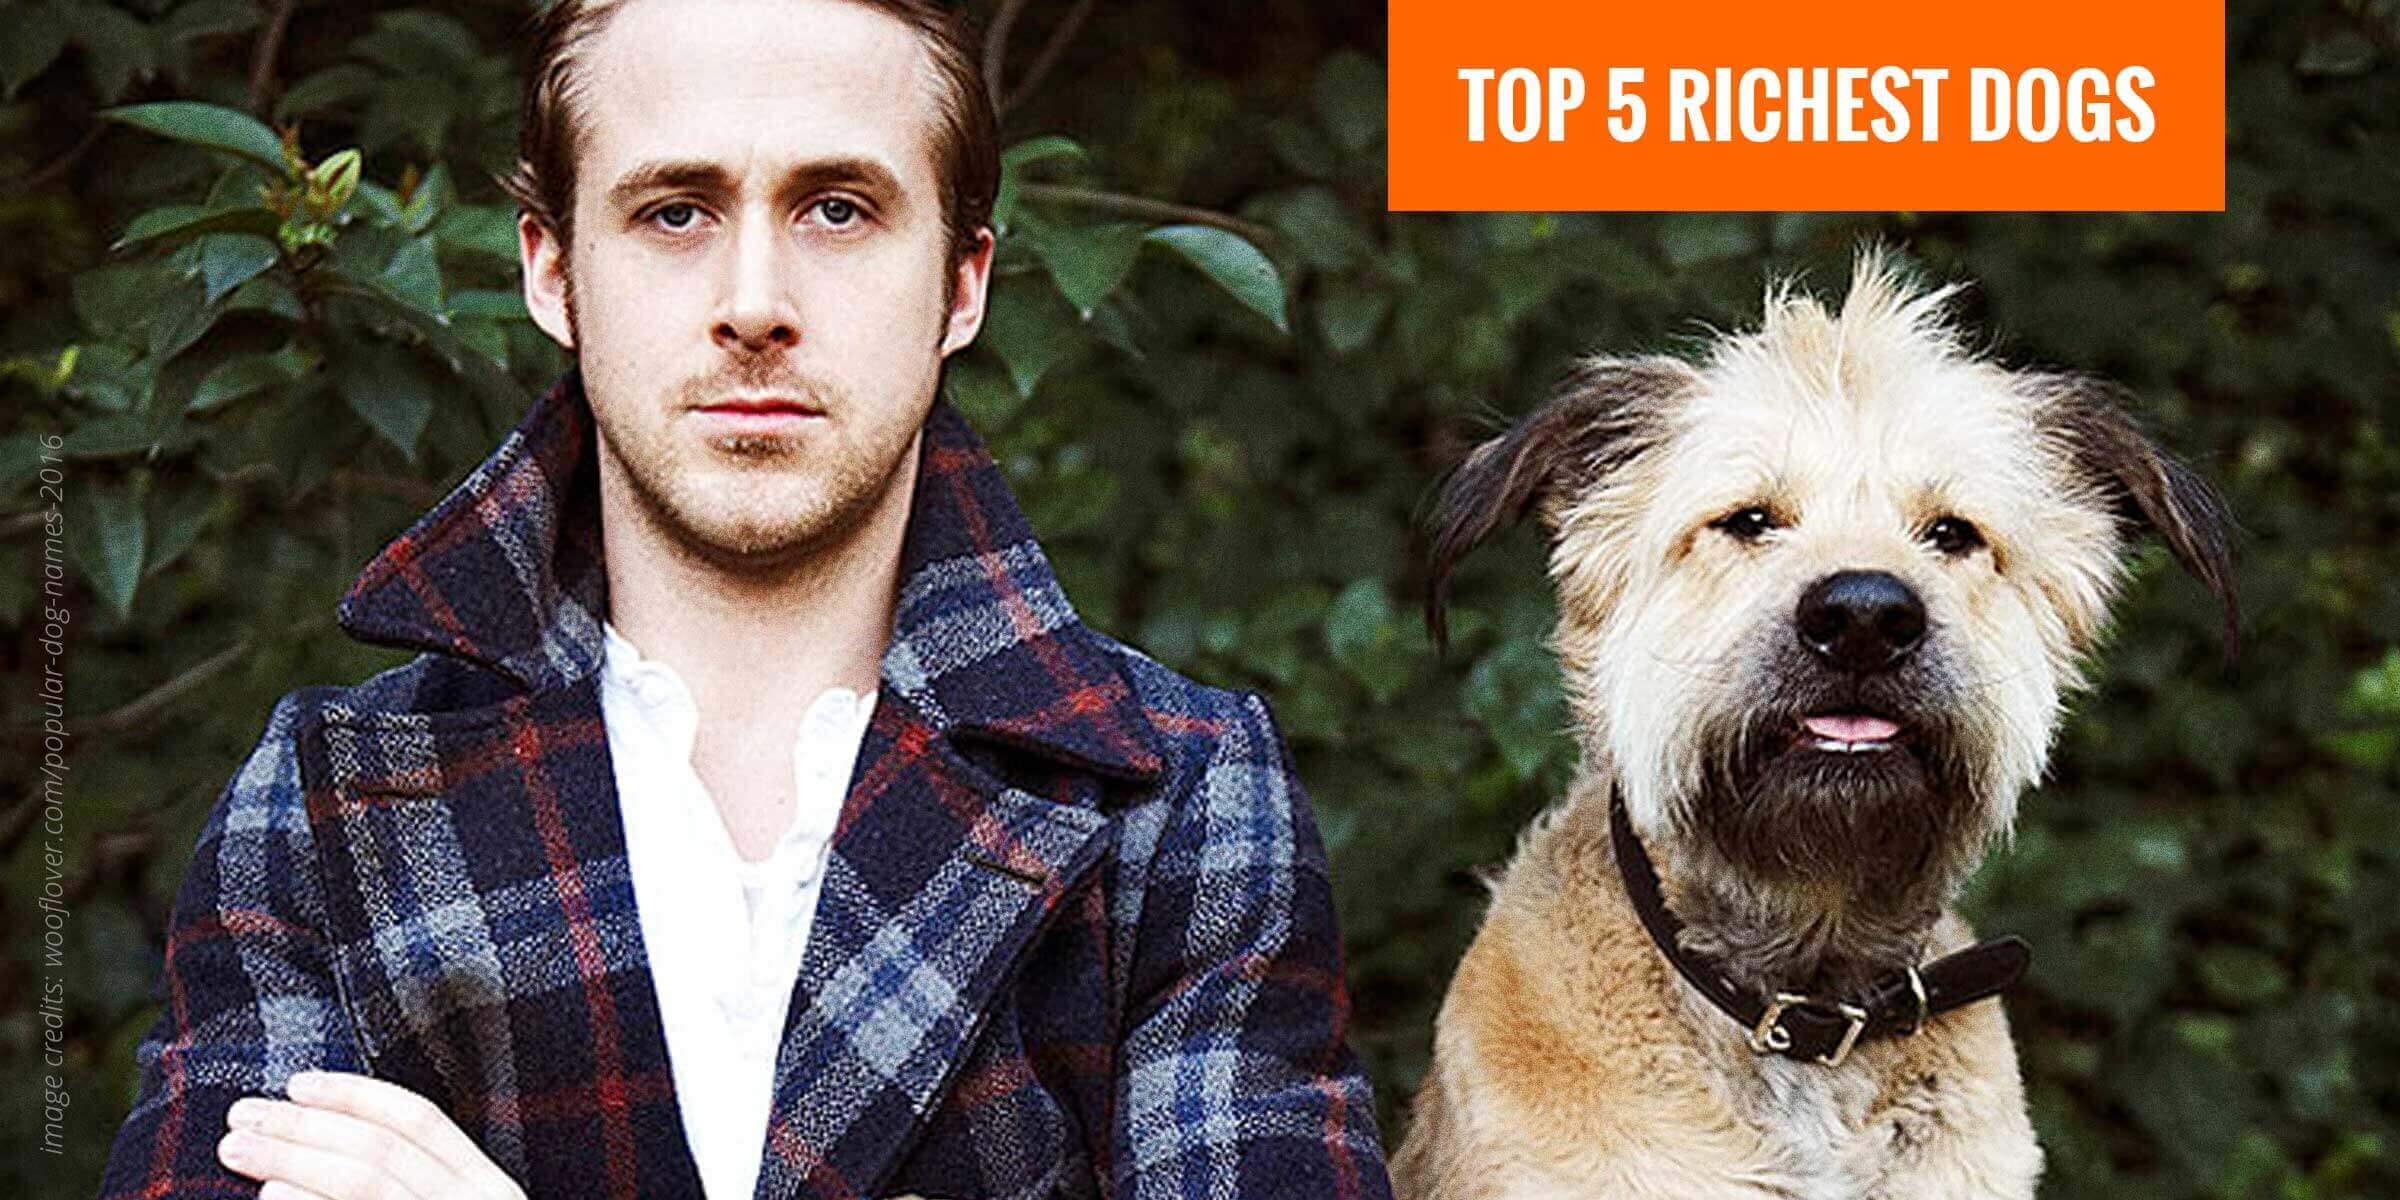 List of the 5 most wealthiest dogs ever!